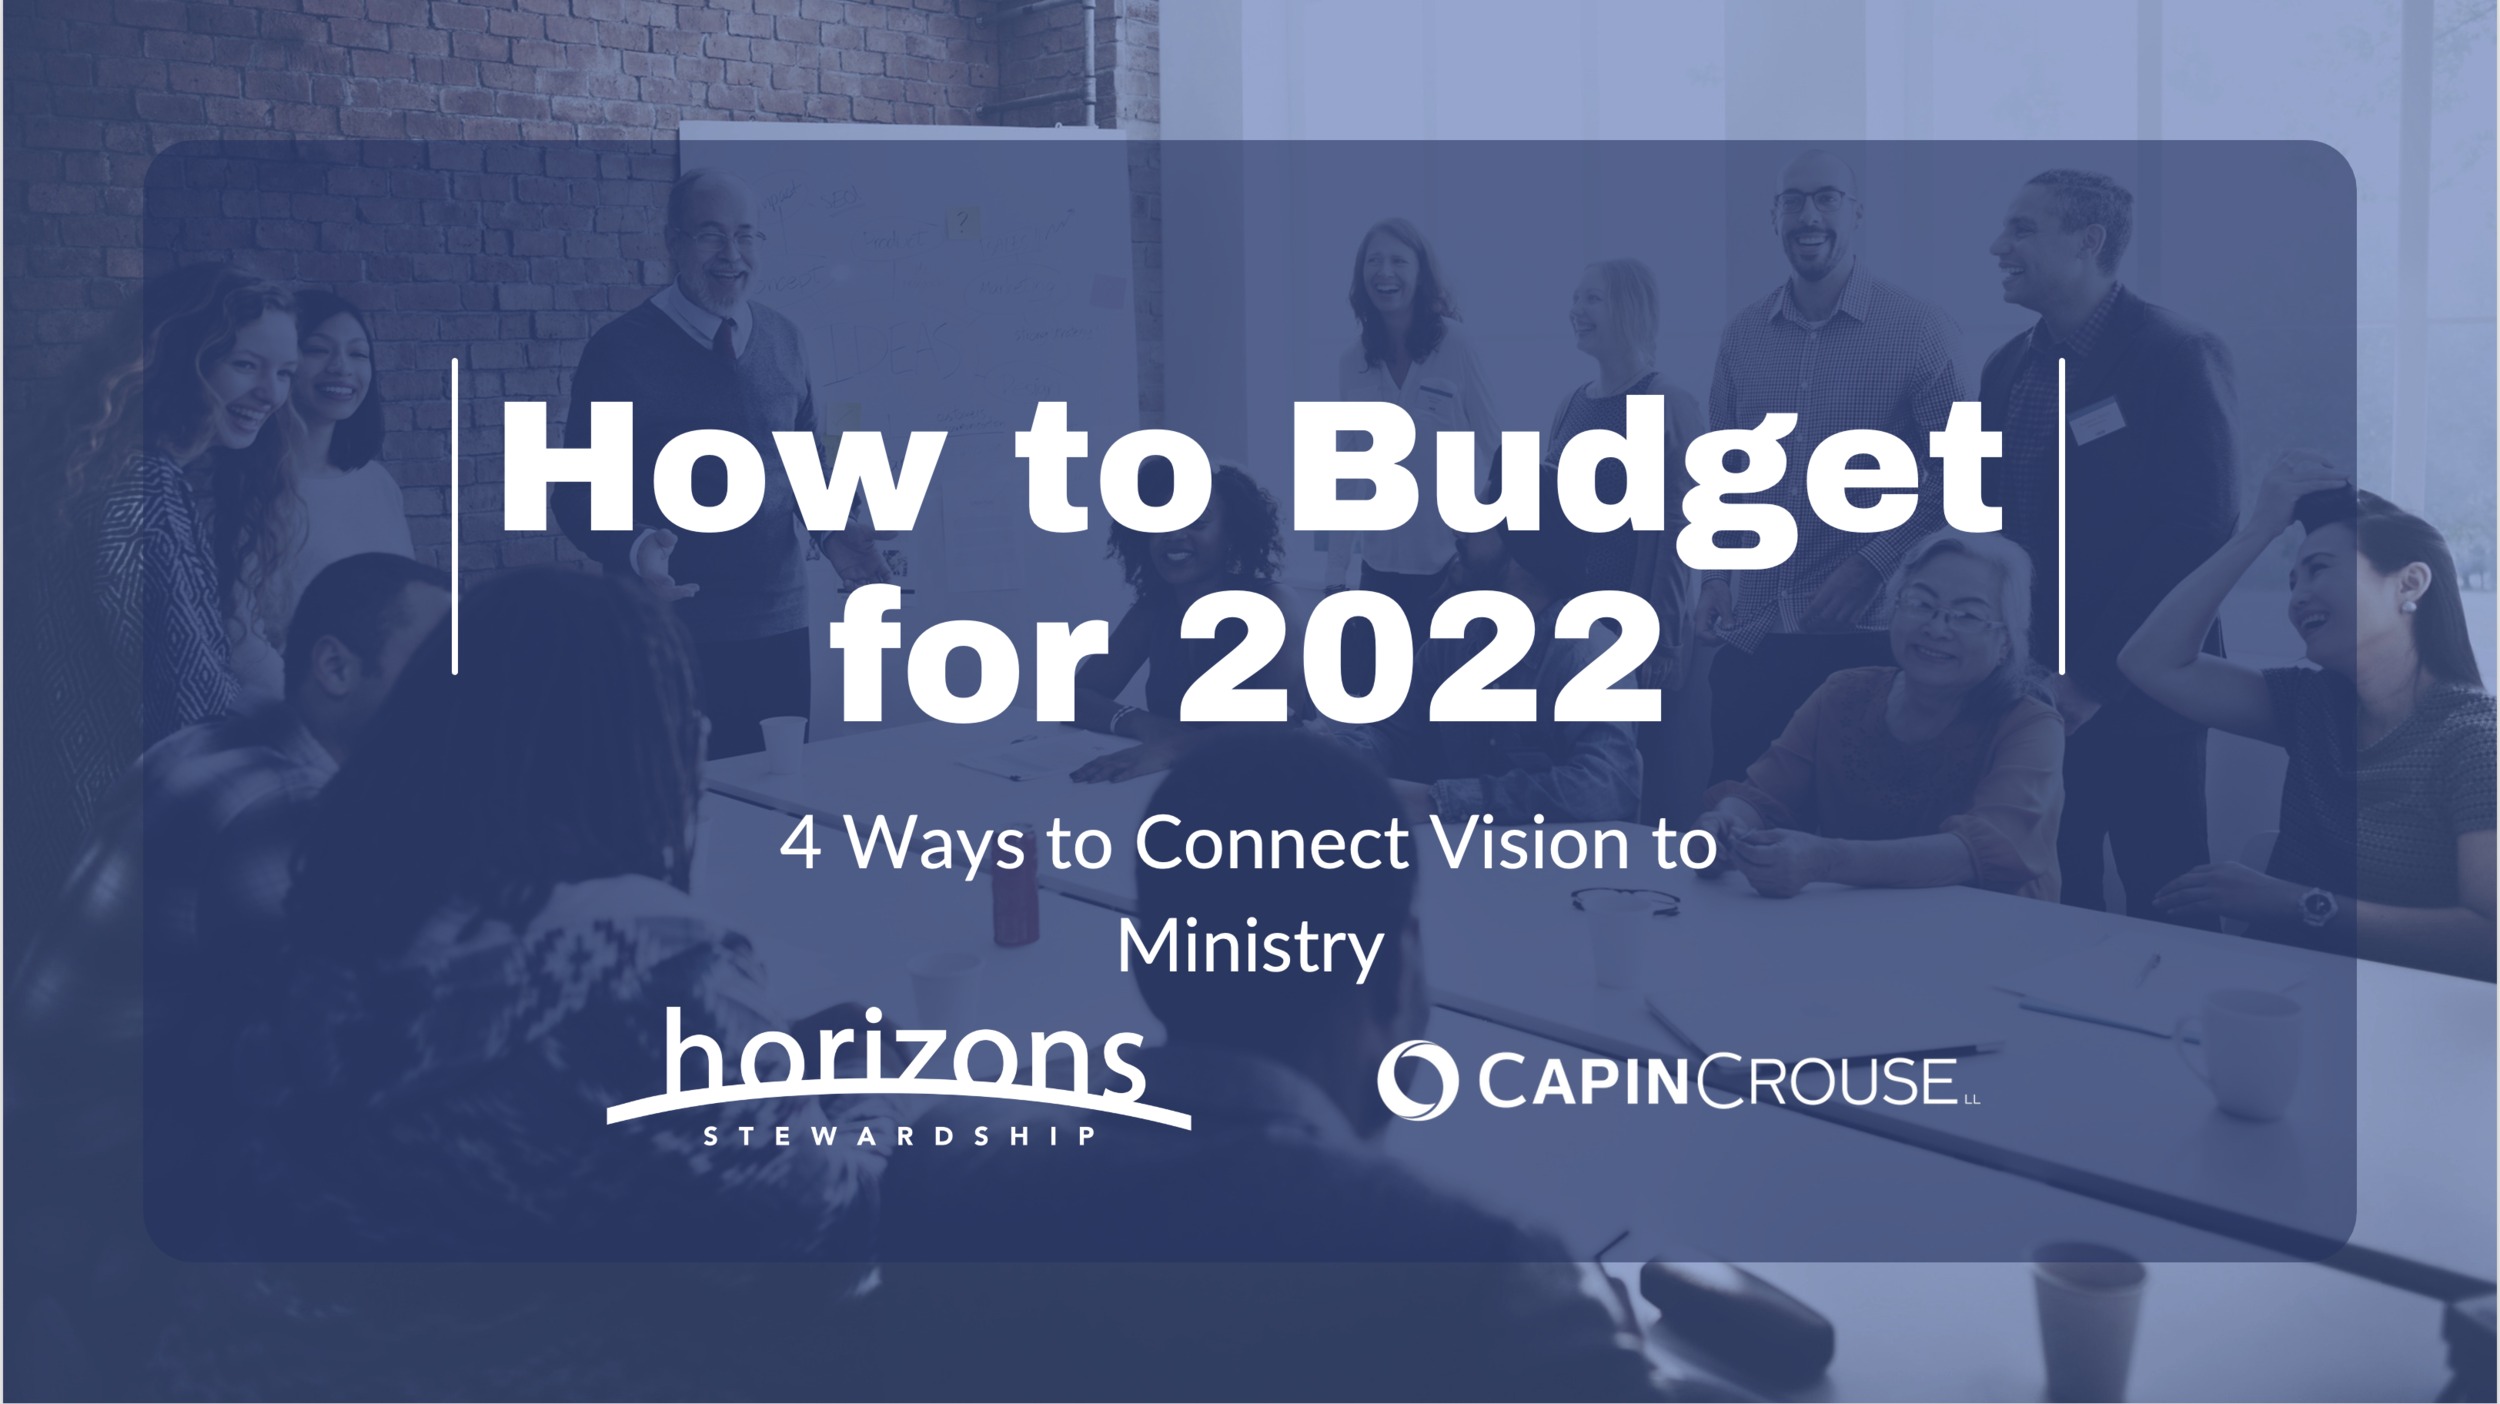 How to Budget for 2022